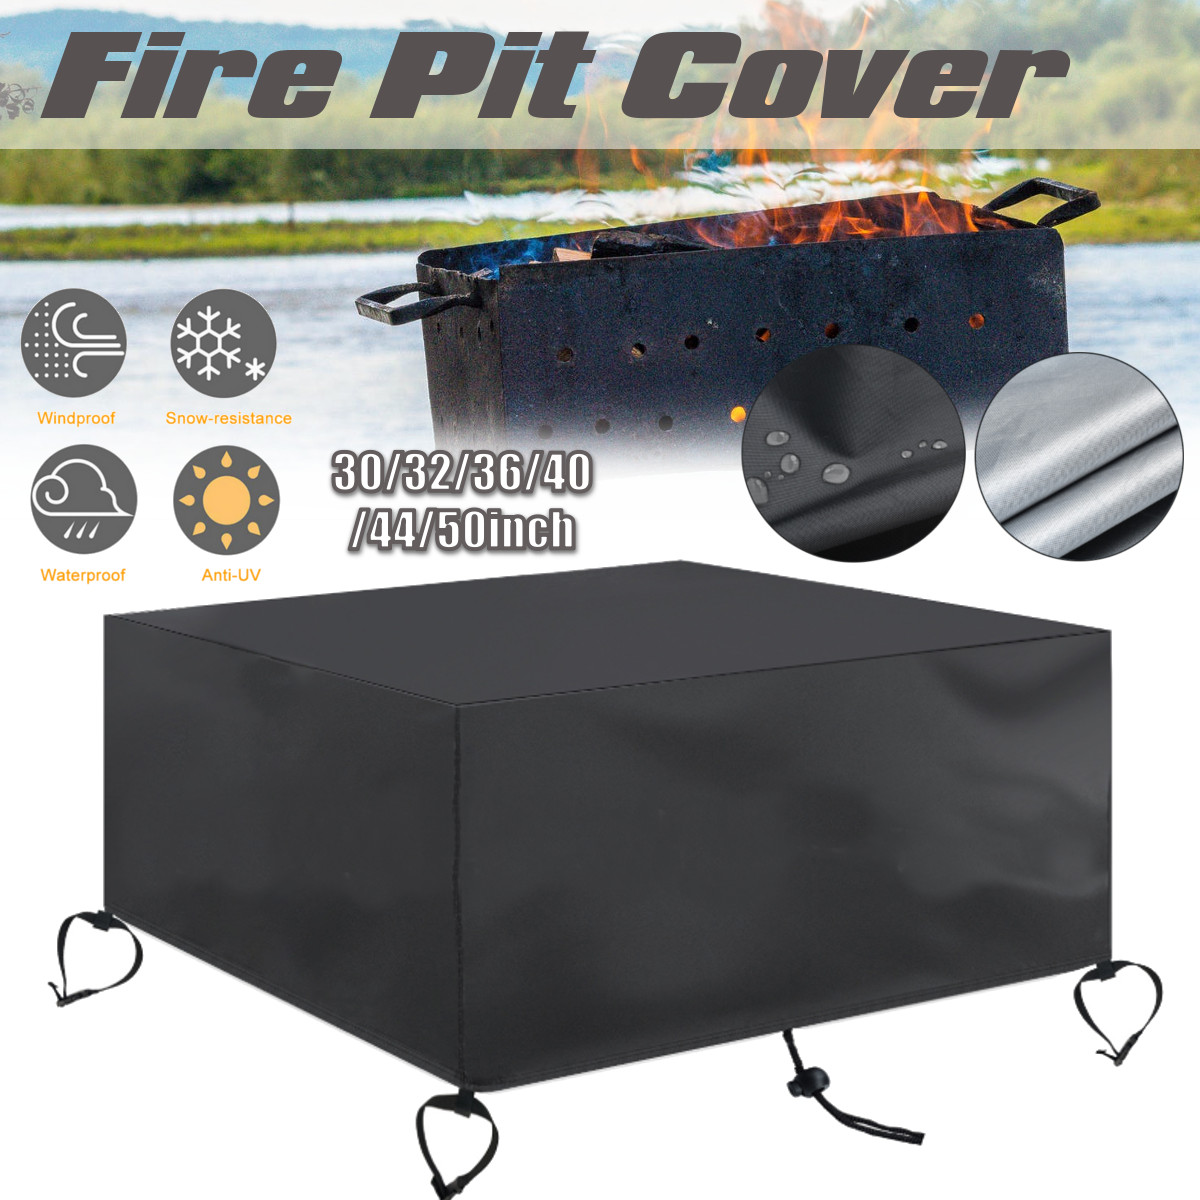 3050quot-Oxford-Cloth-Fire-Pit-Cover-Patio-Square-Table-Cover-Grill-BBQ-Gas-Waterproof-Anti-Crack-UV-1756722-1